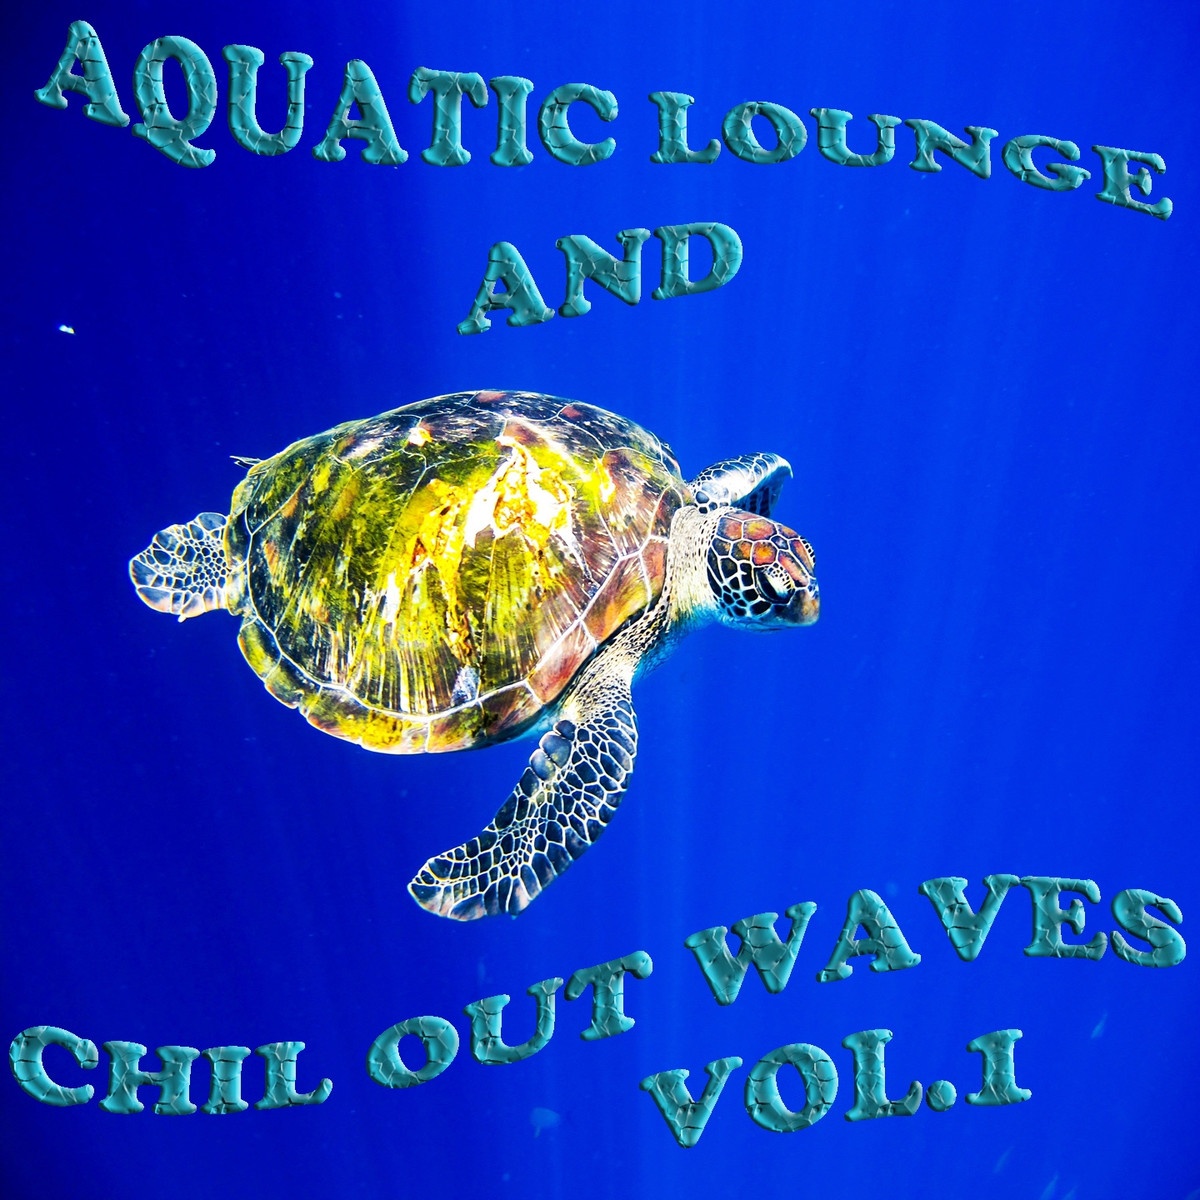 Aquatic Lounge and Chill Out Waves, Vol. 1 (Oceanic Downbeat Grooves)